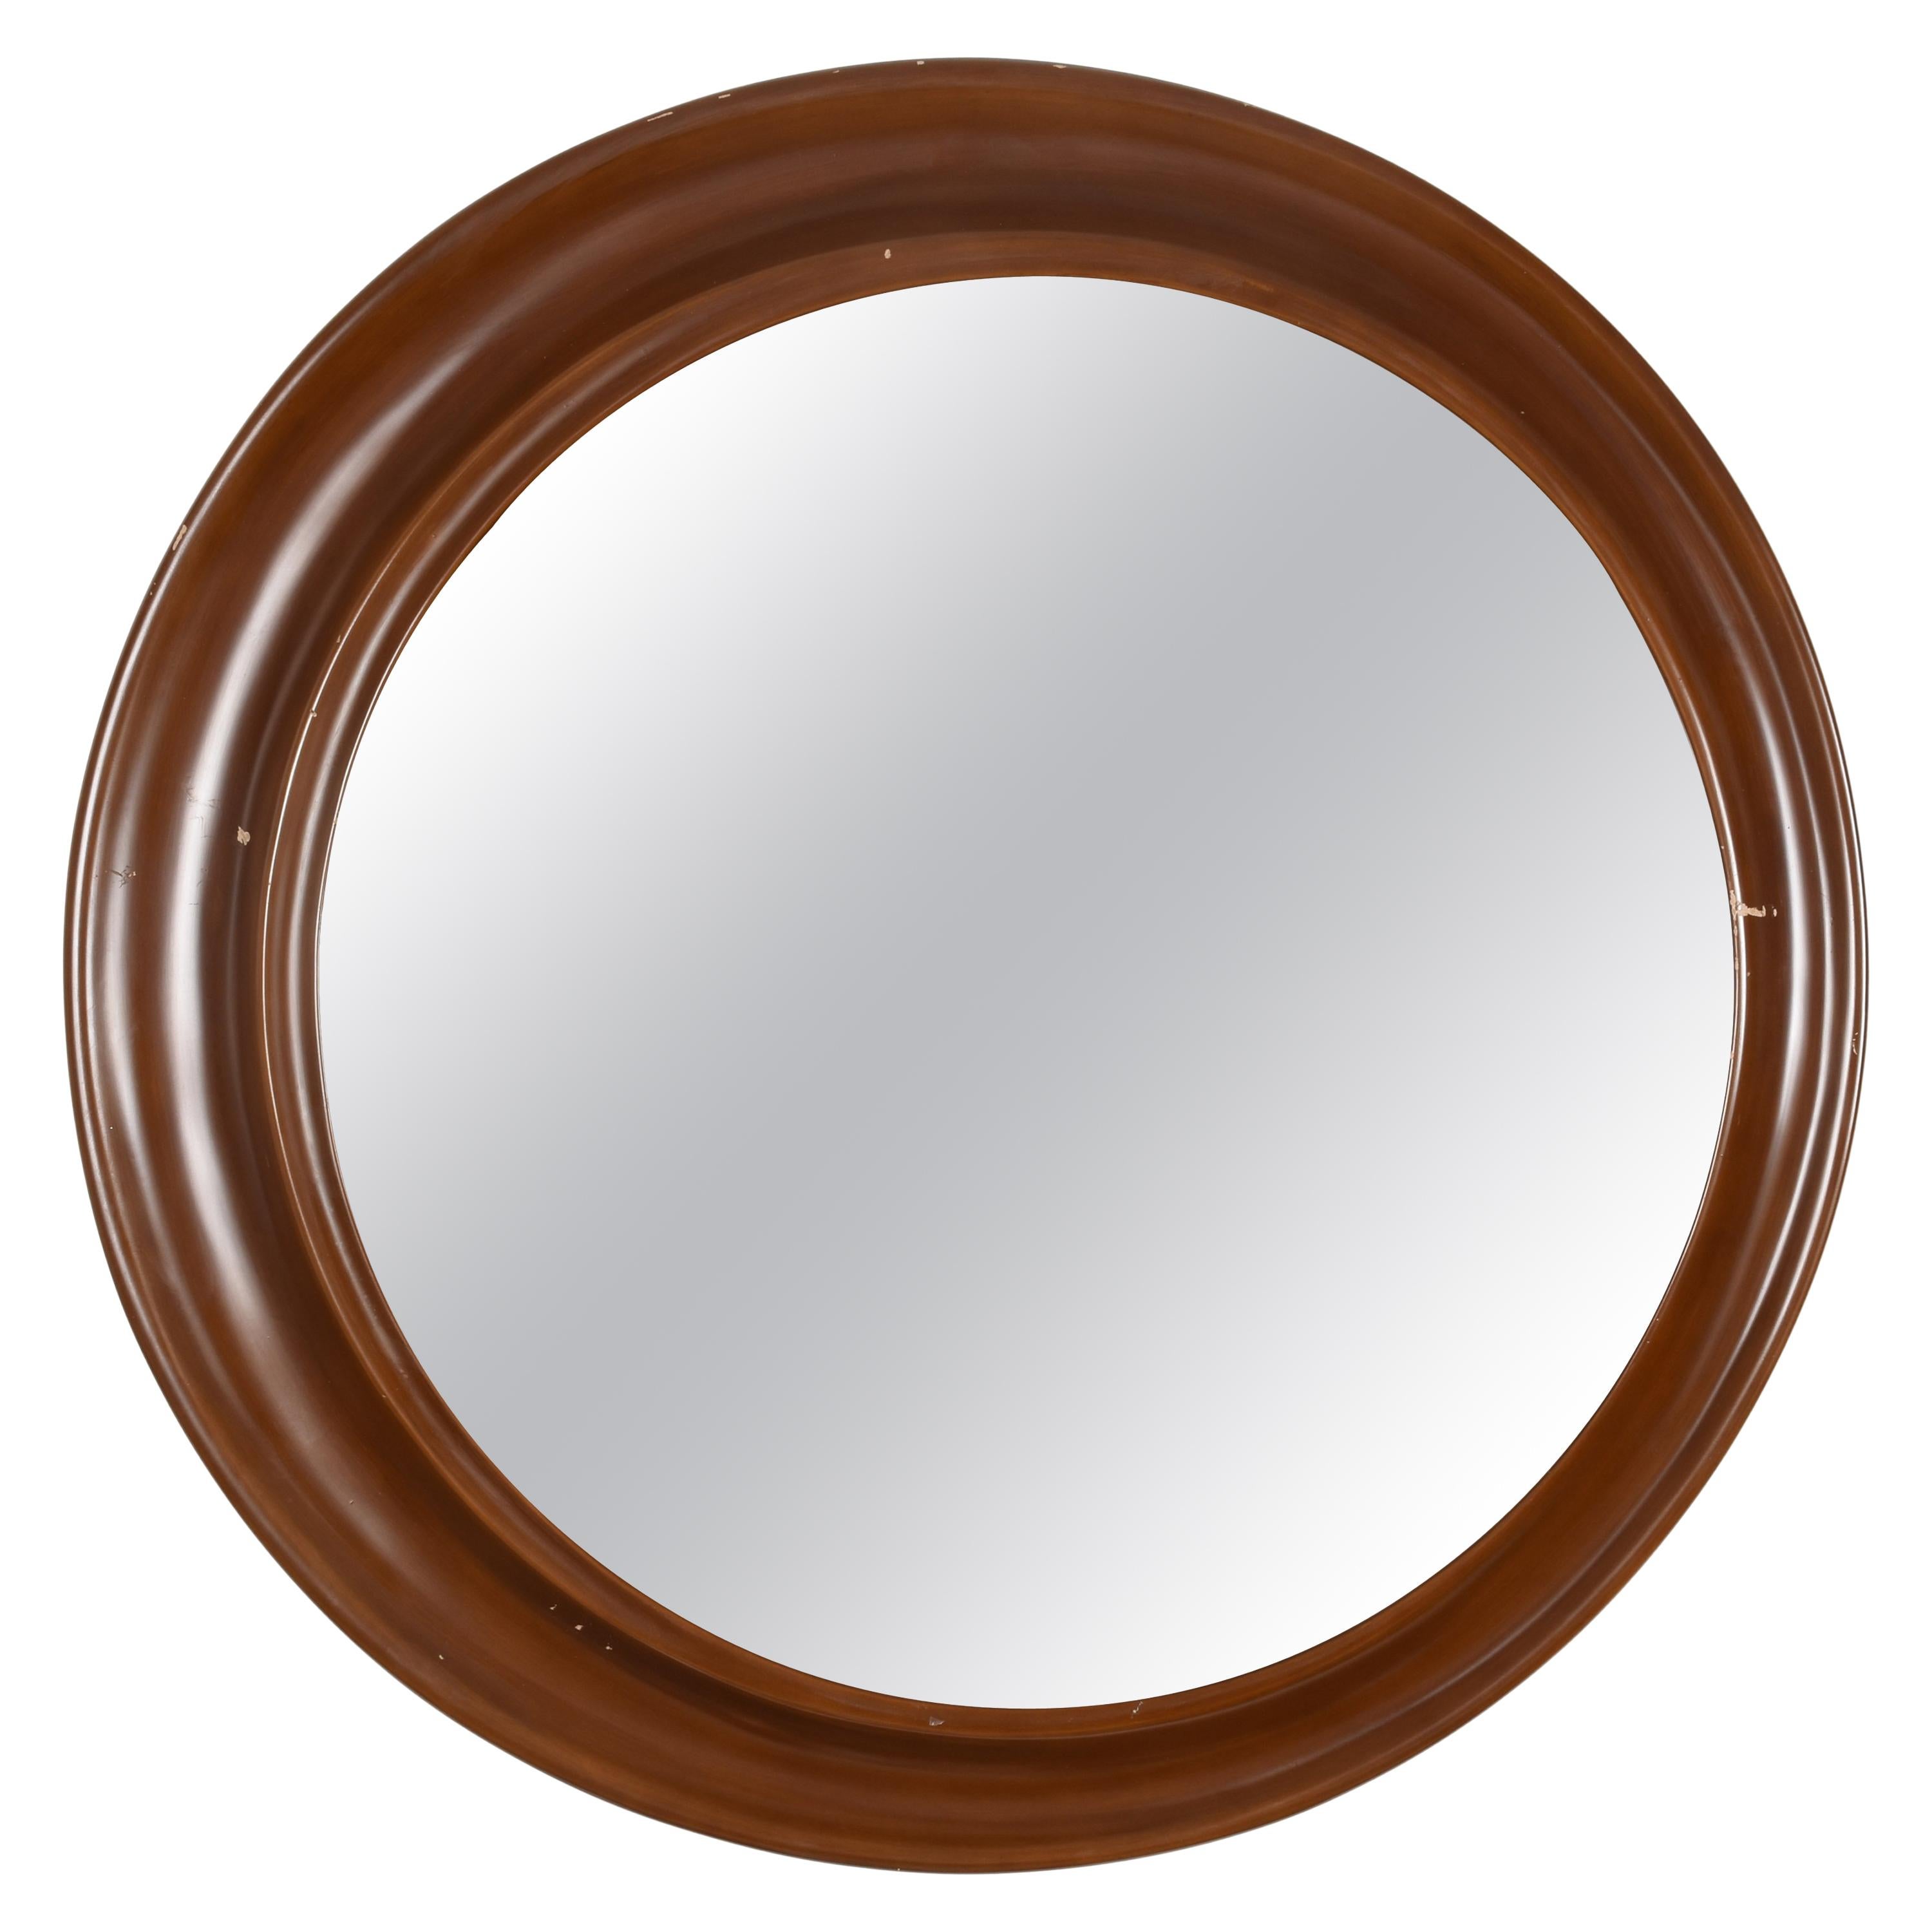 Round Mirror with Frame in Lacquered Wood, Italy Design, 1970s